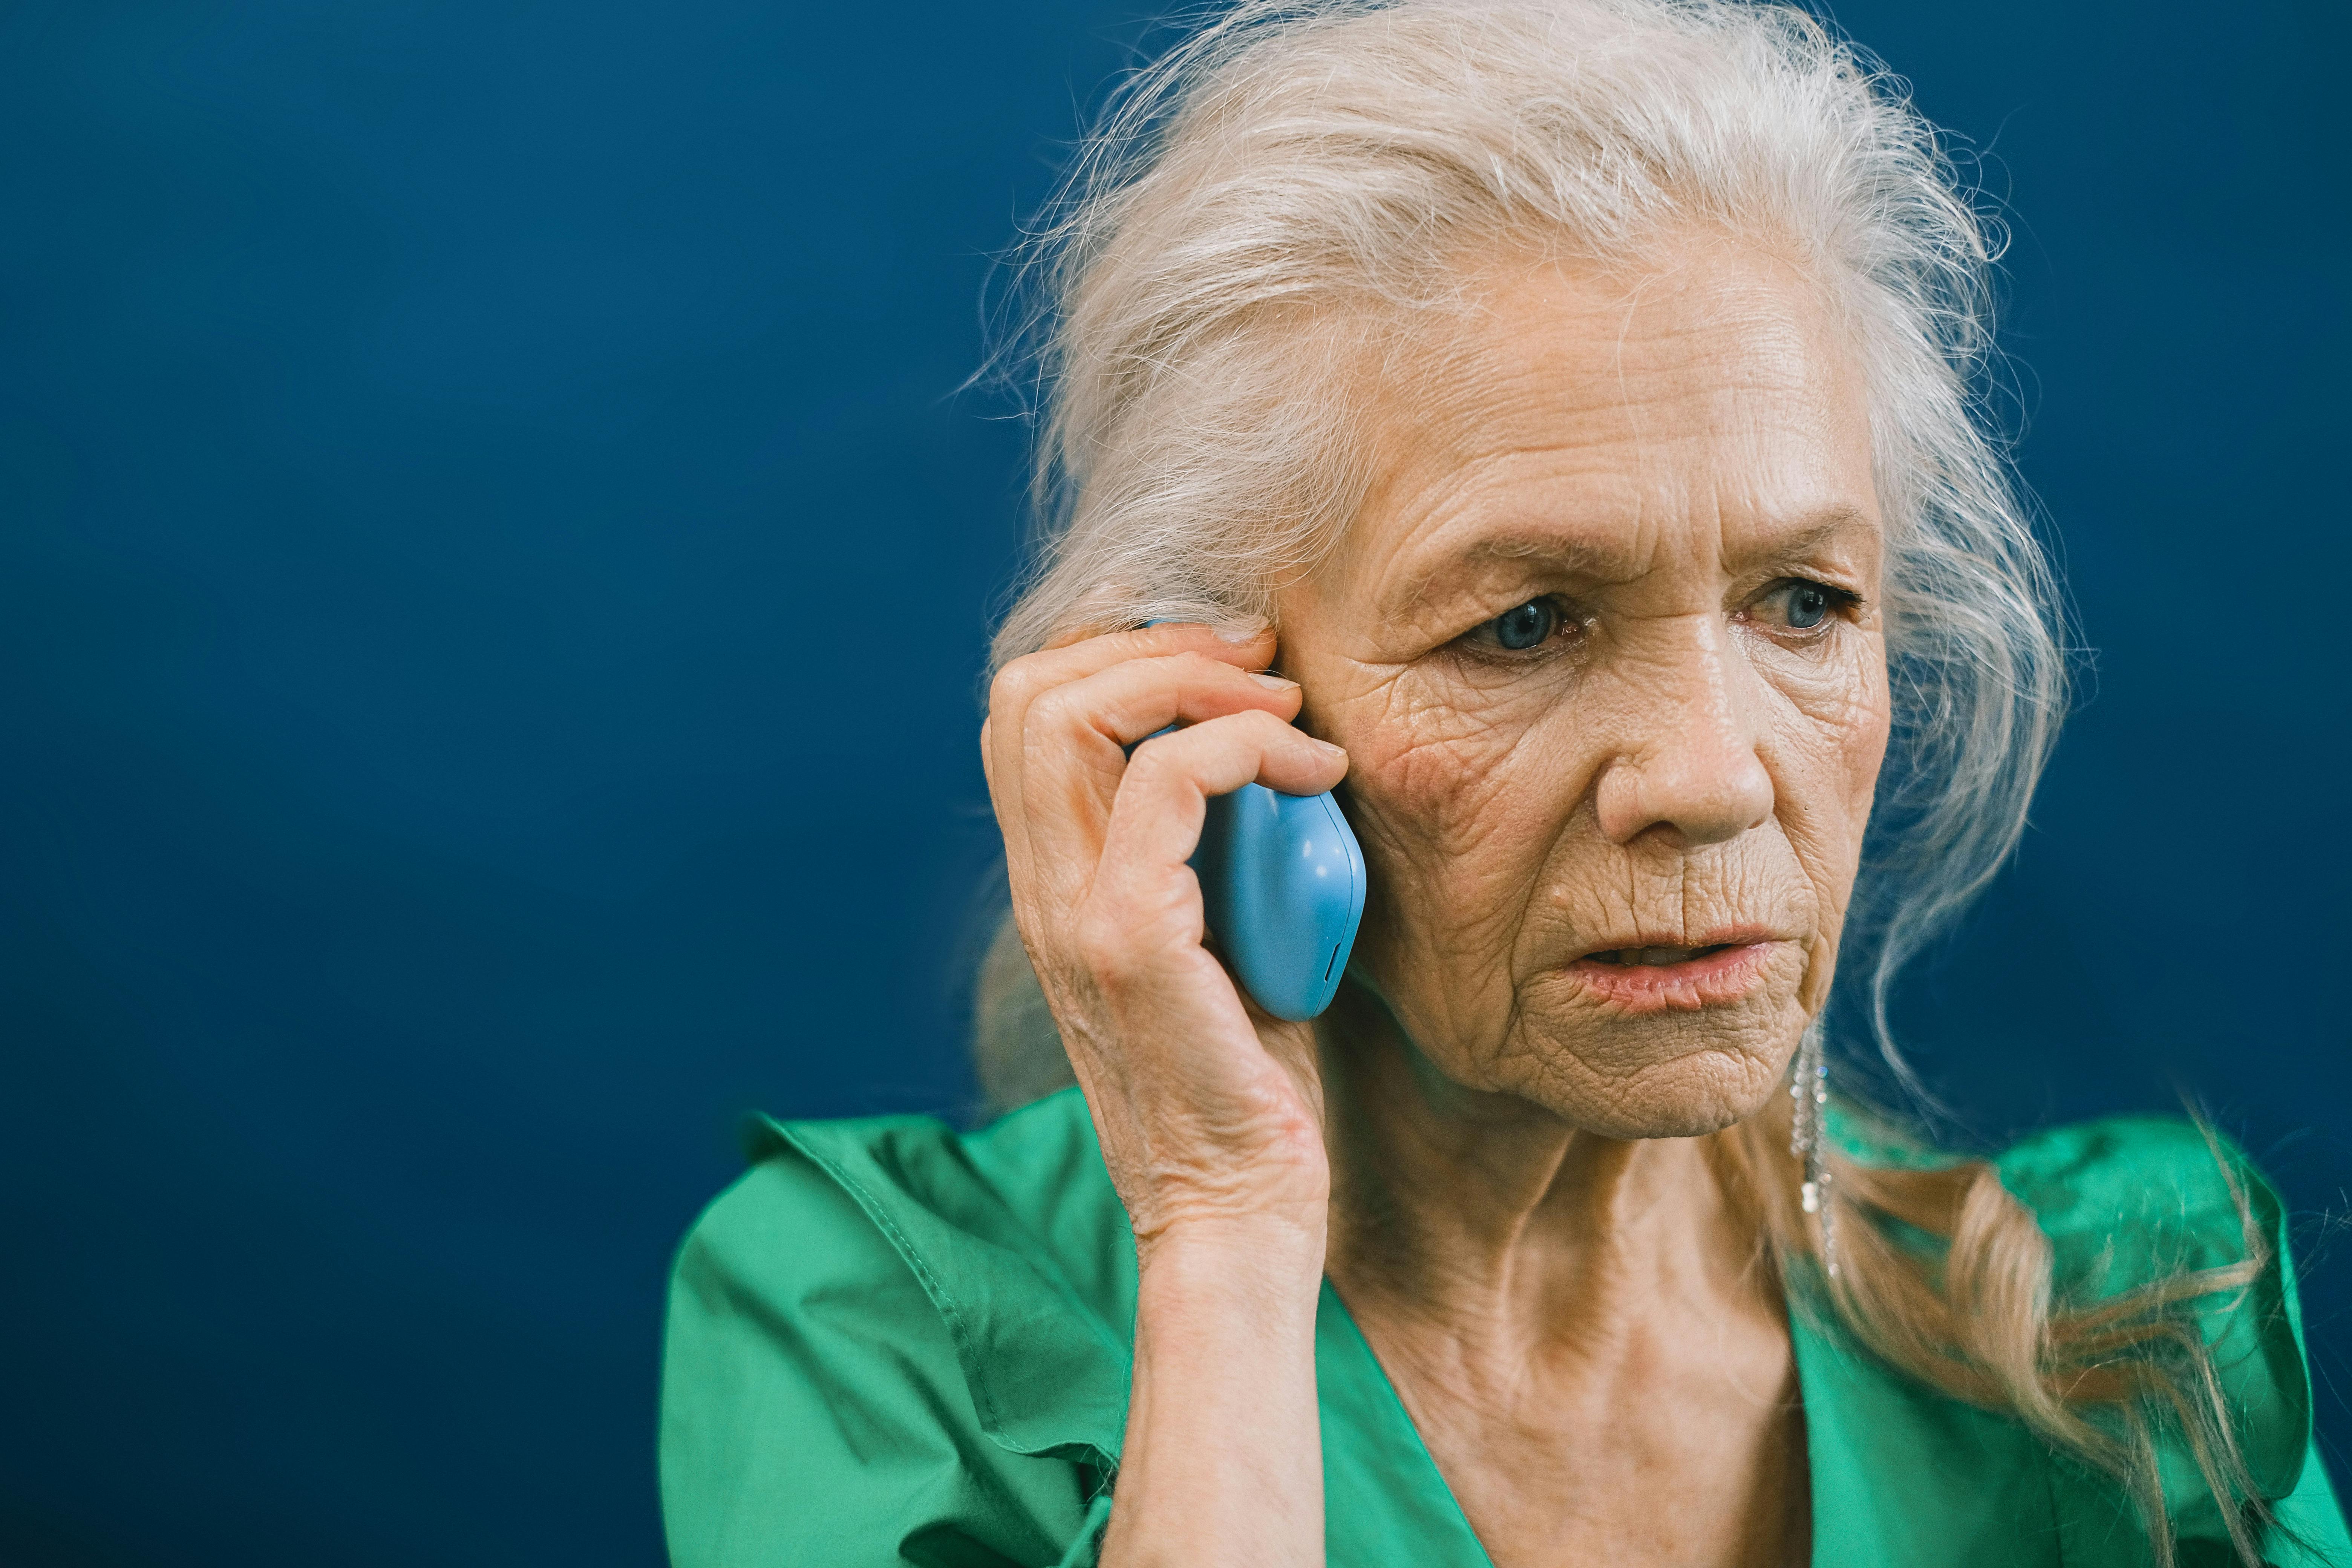 A senior woman on call | Source: Pexels